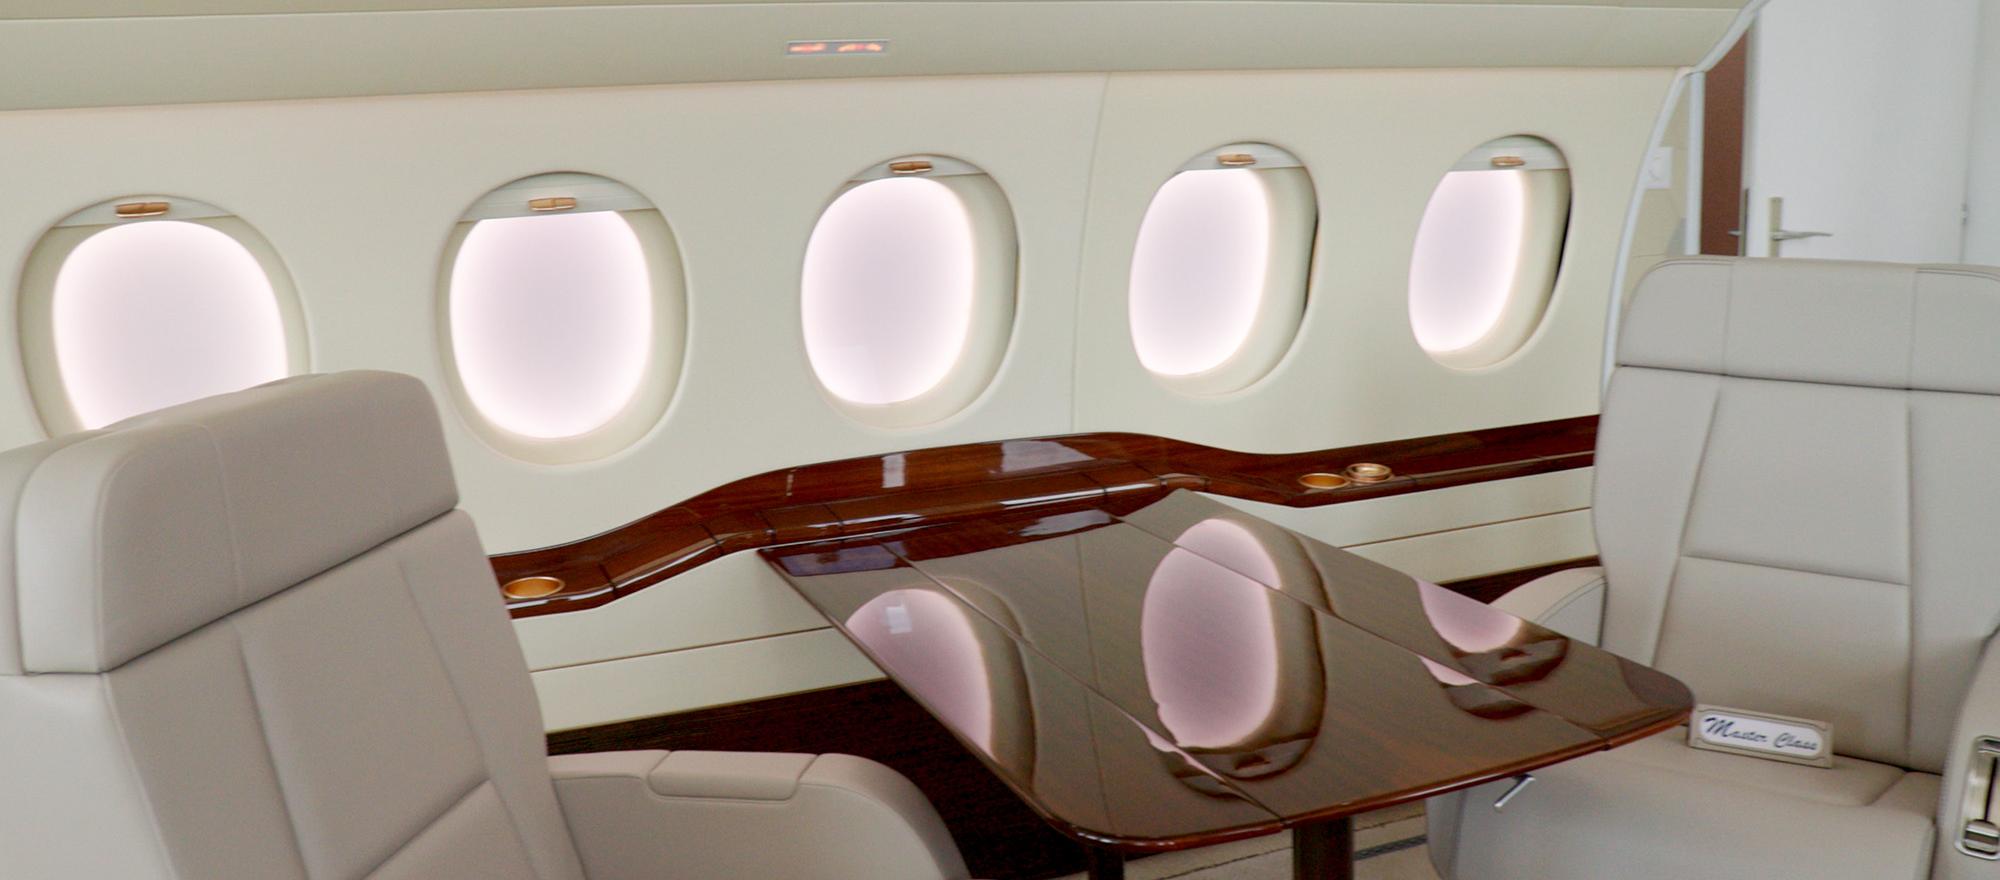 Dassault Gets Creative To Speed Up Cabin Completions